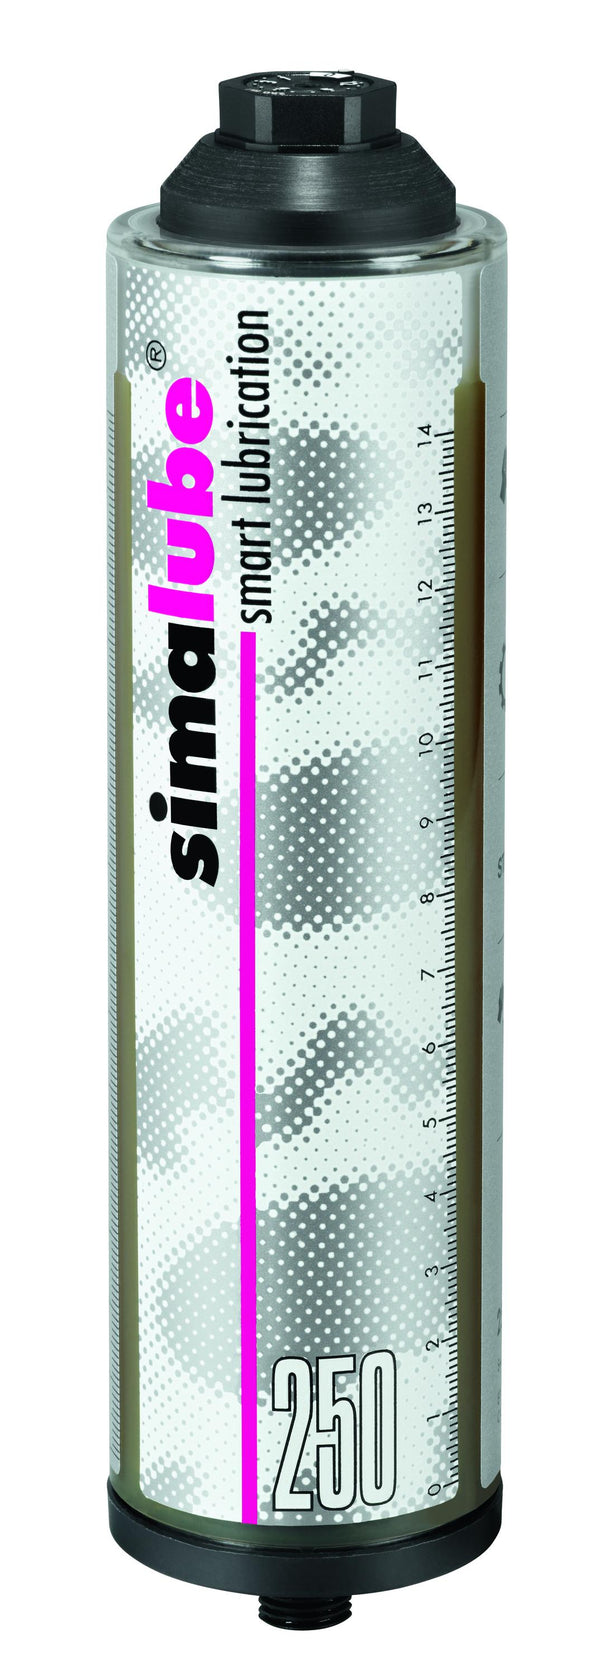 Simalube lubrication cartridge filled with universal grease 250ml